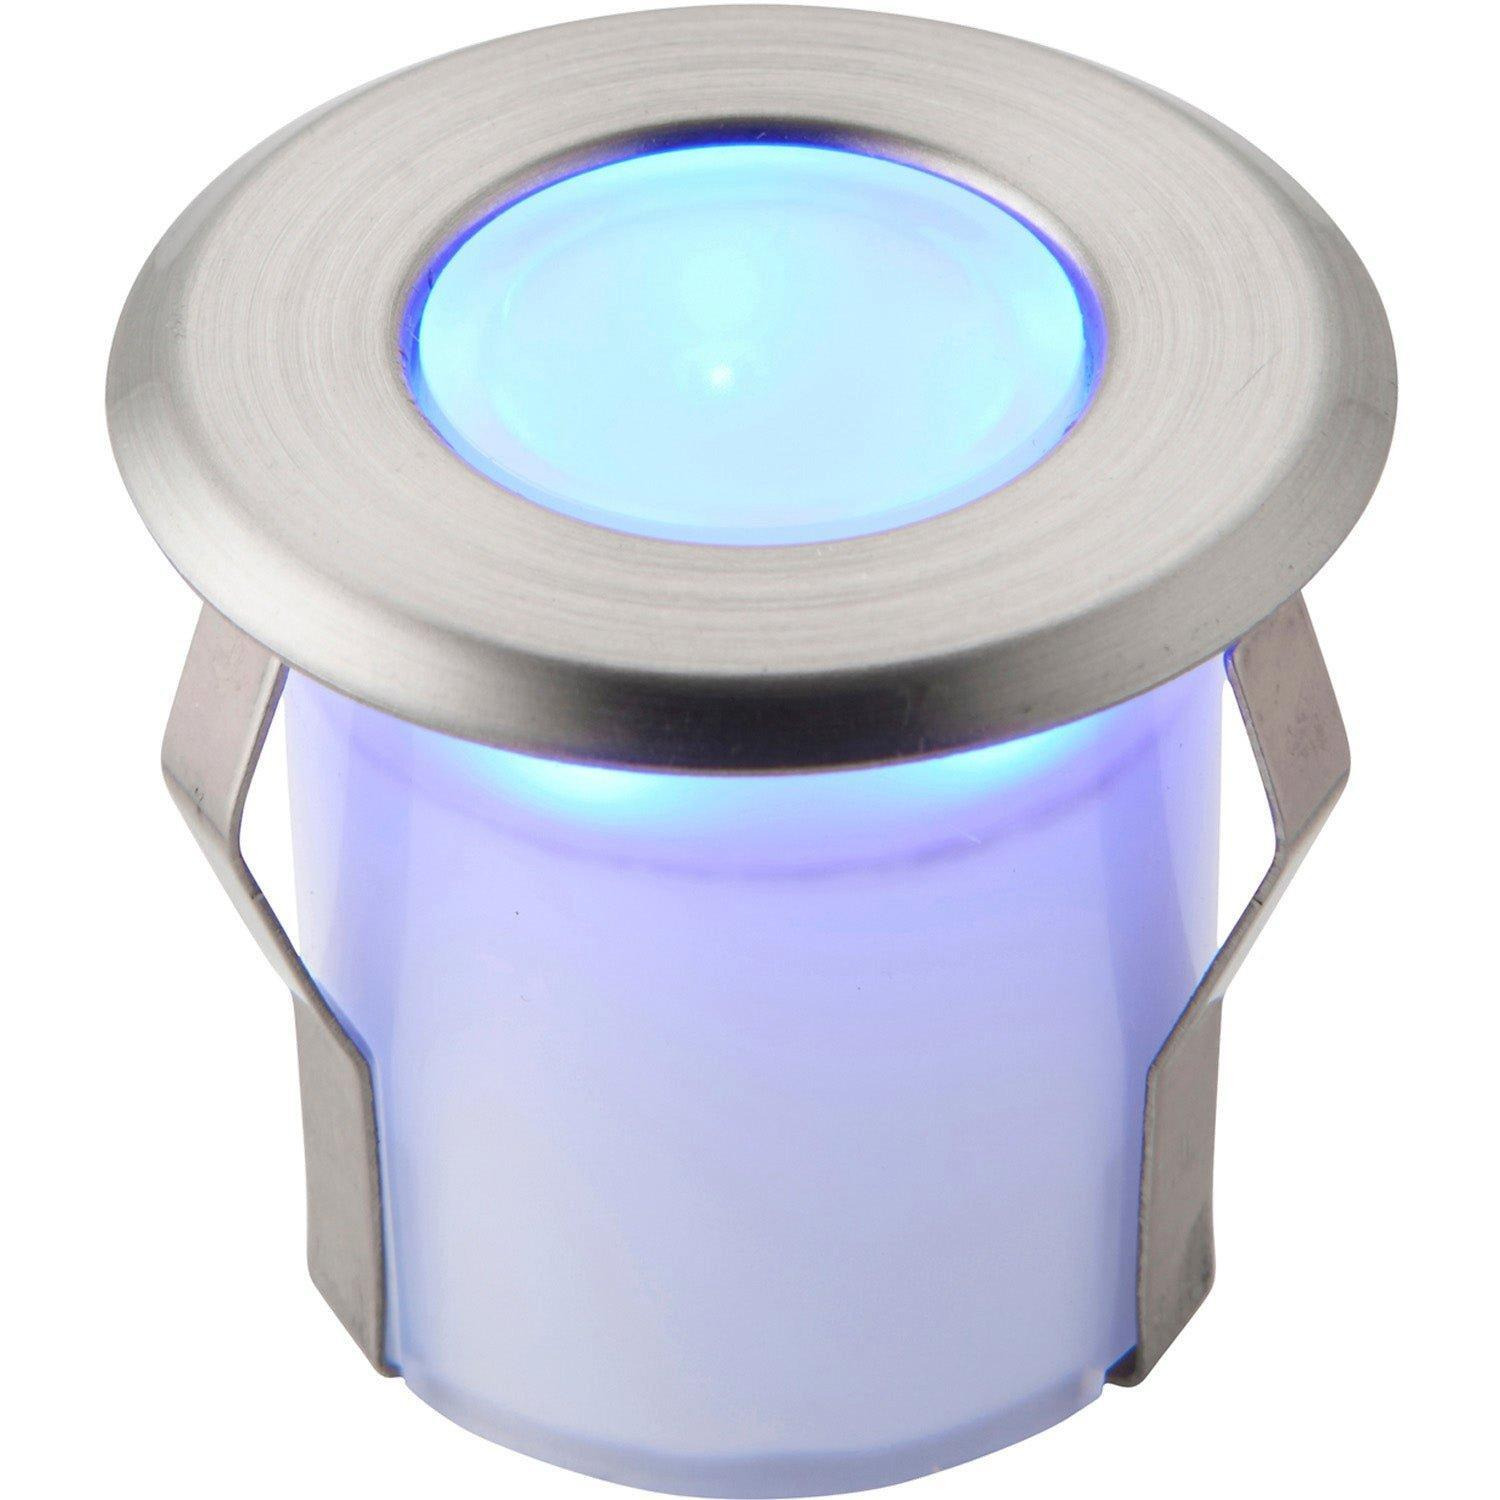 Recessed Decking IP67 Guide Light - 0.8W Blue Light LED - Stainless Steel - image 1